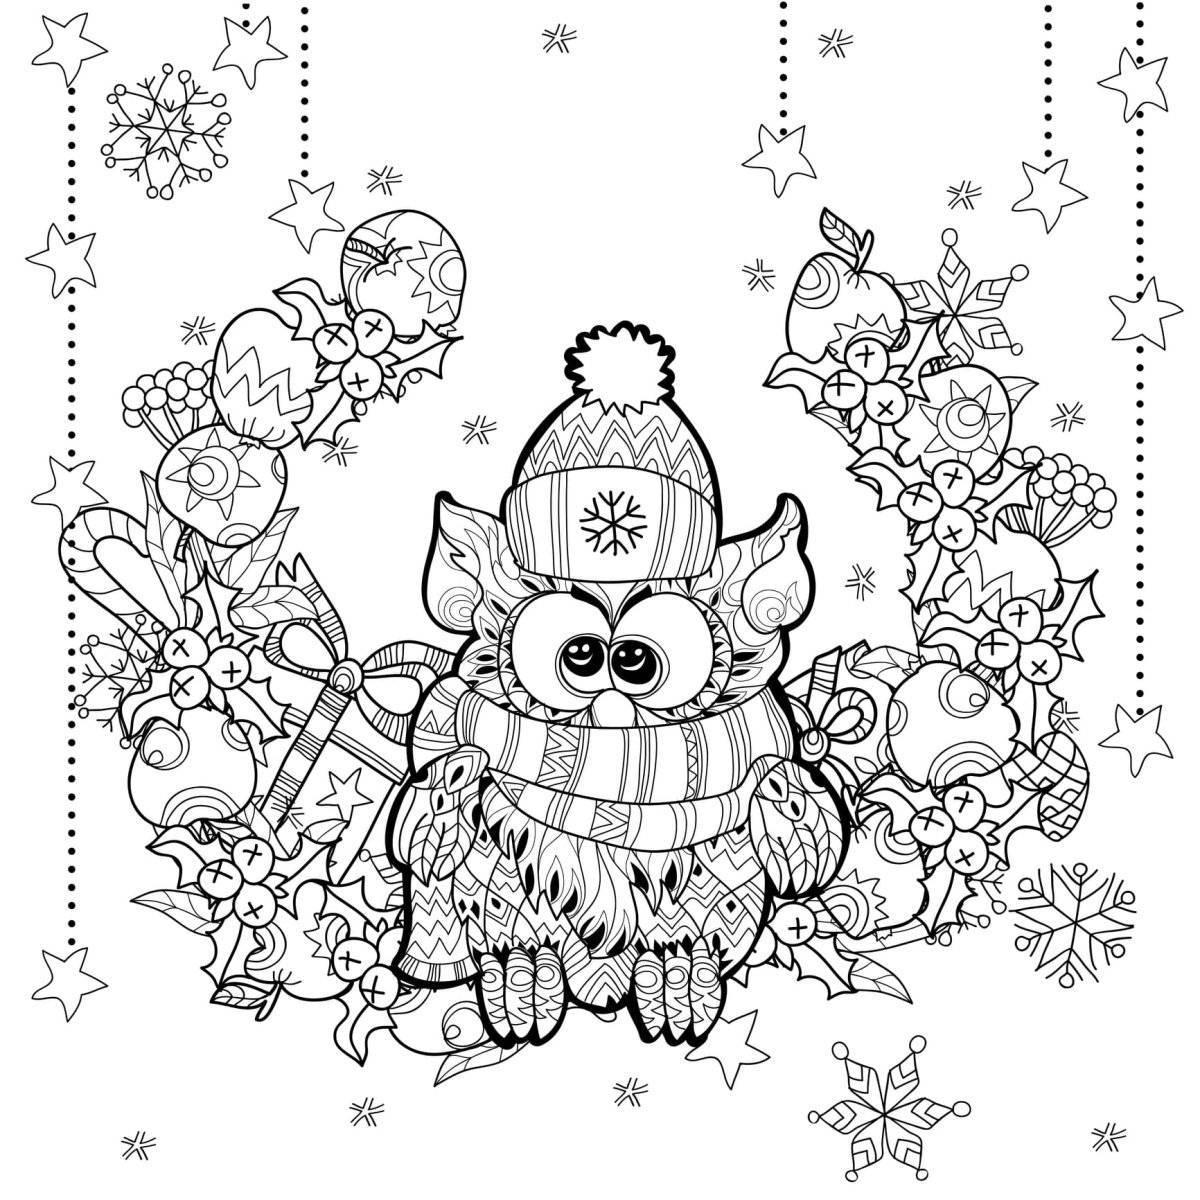 Relaxing anti-stress Christmas coloring book